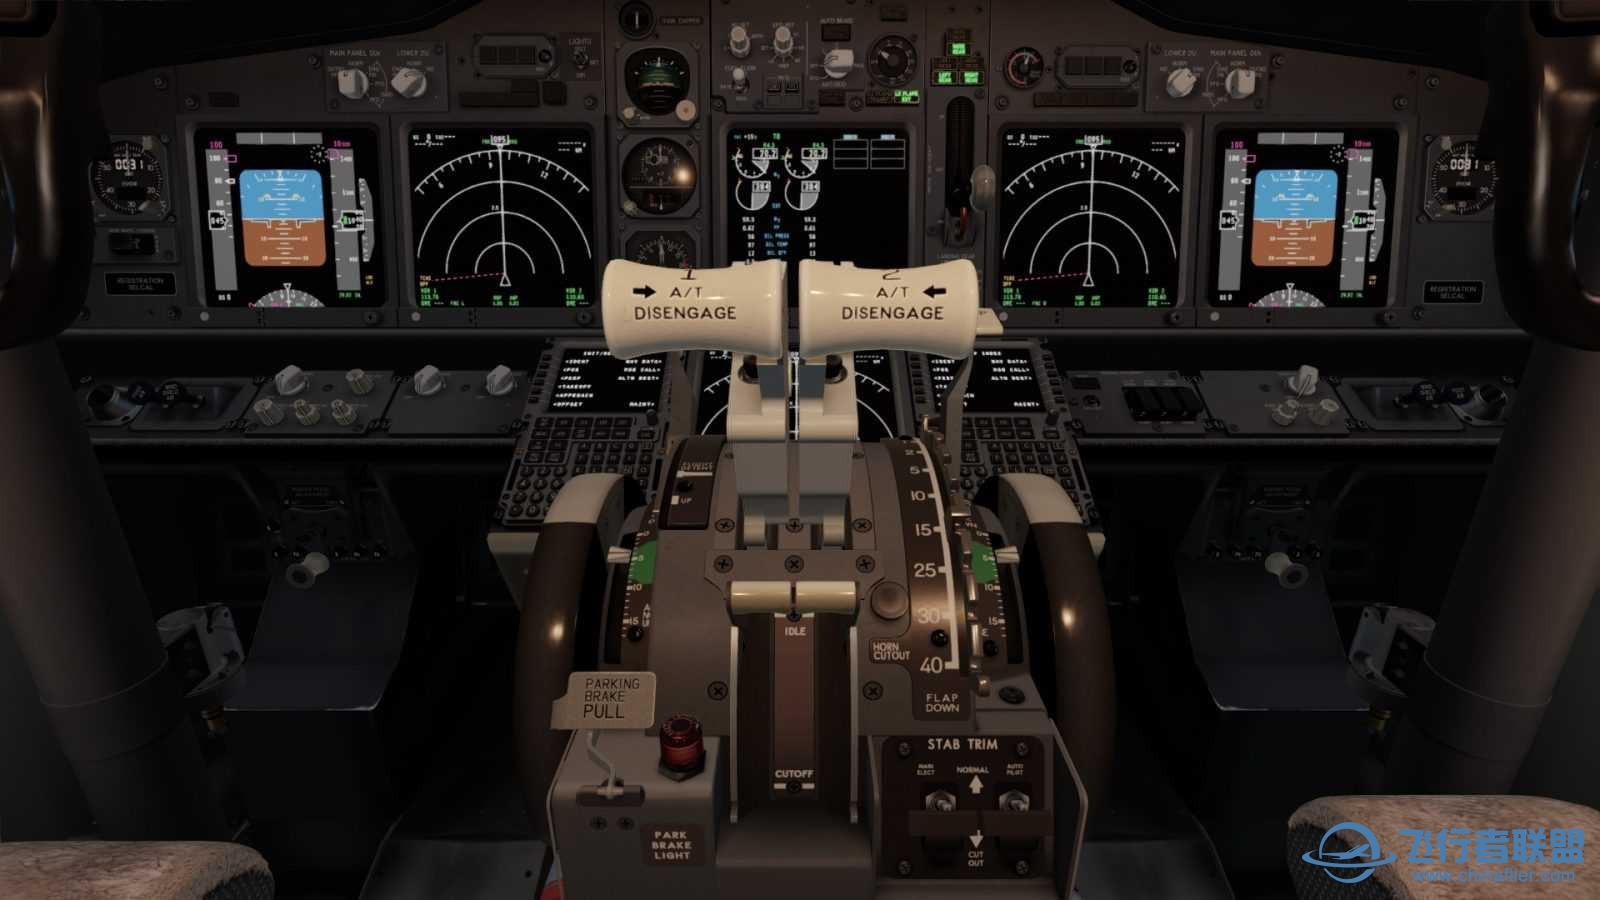 ifly-jets-advanced-series-737ng-release-candidate-p3d-07-1600x900.jpg